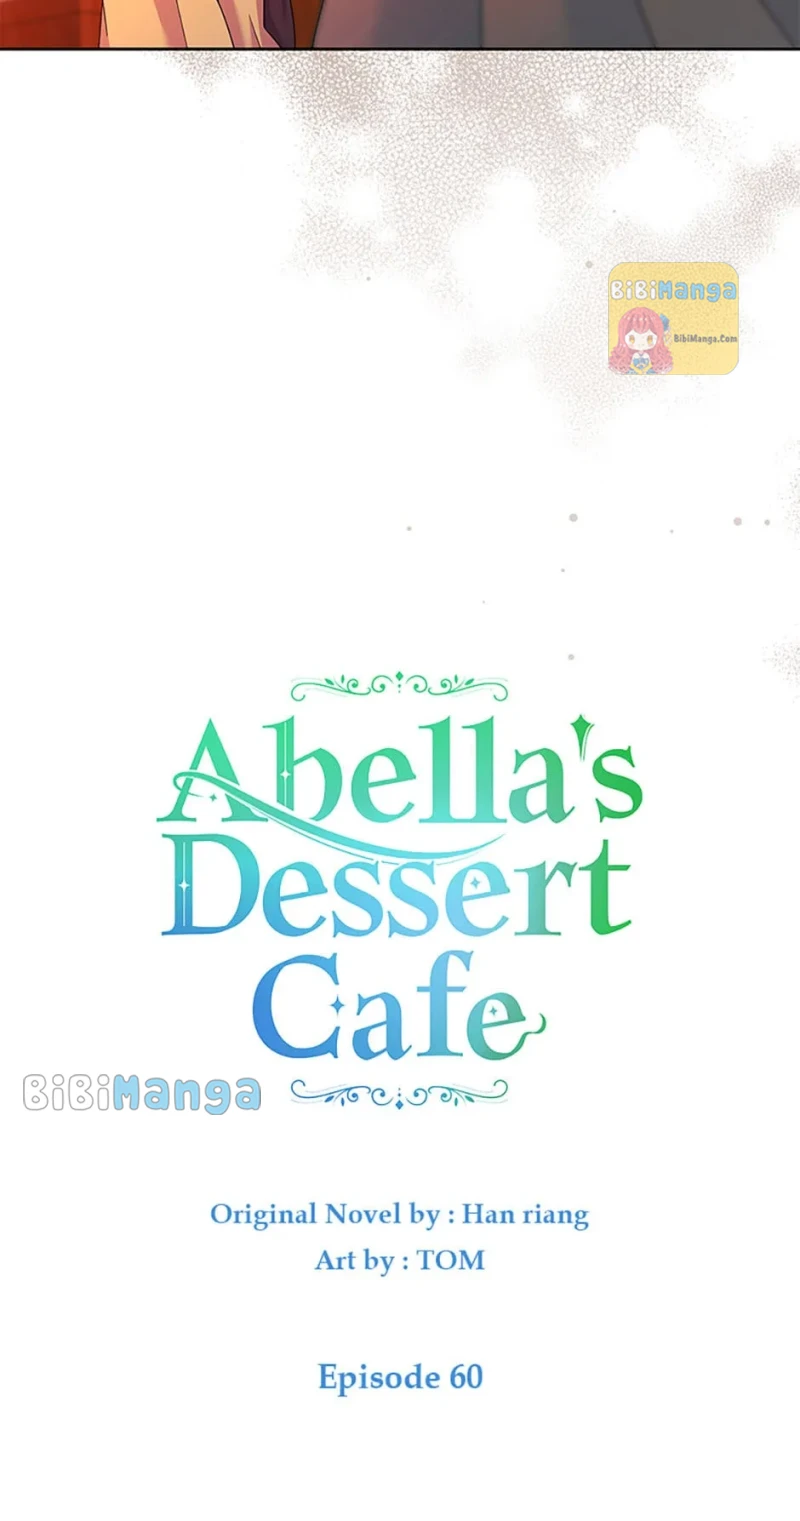 She came back and opened a dessert shop chapter 60